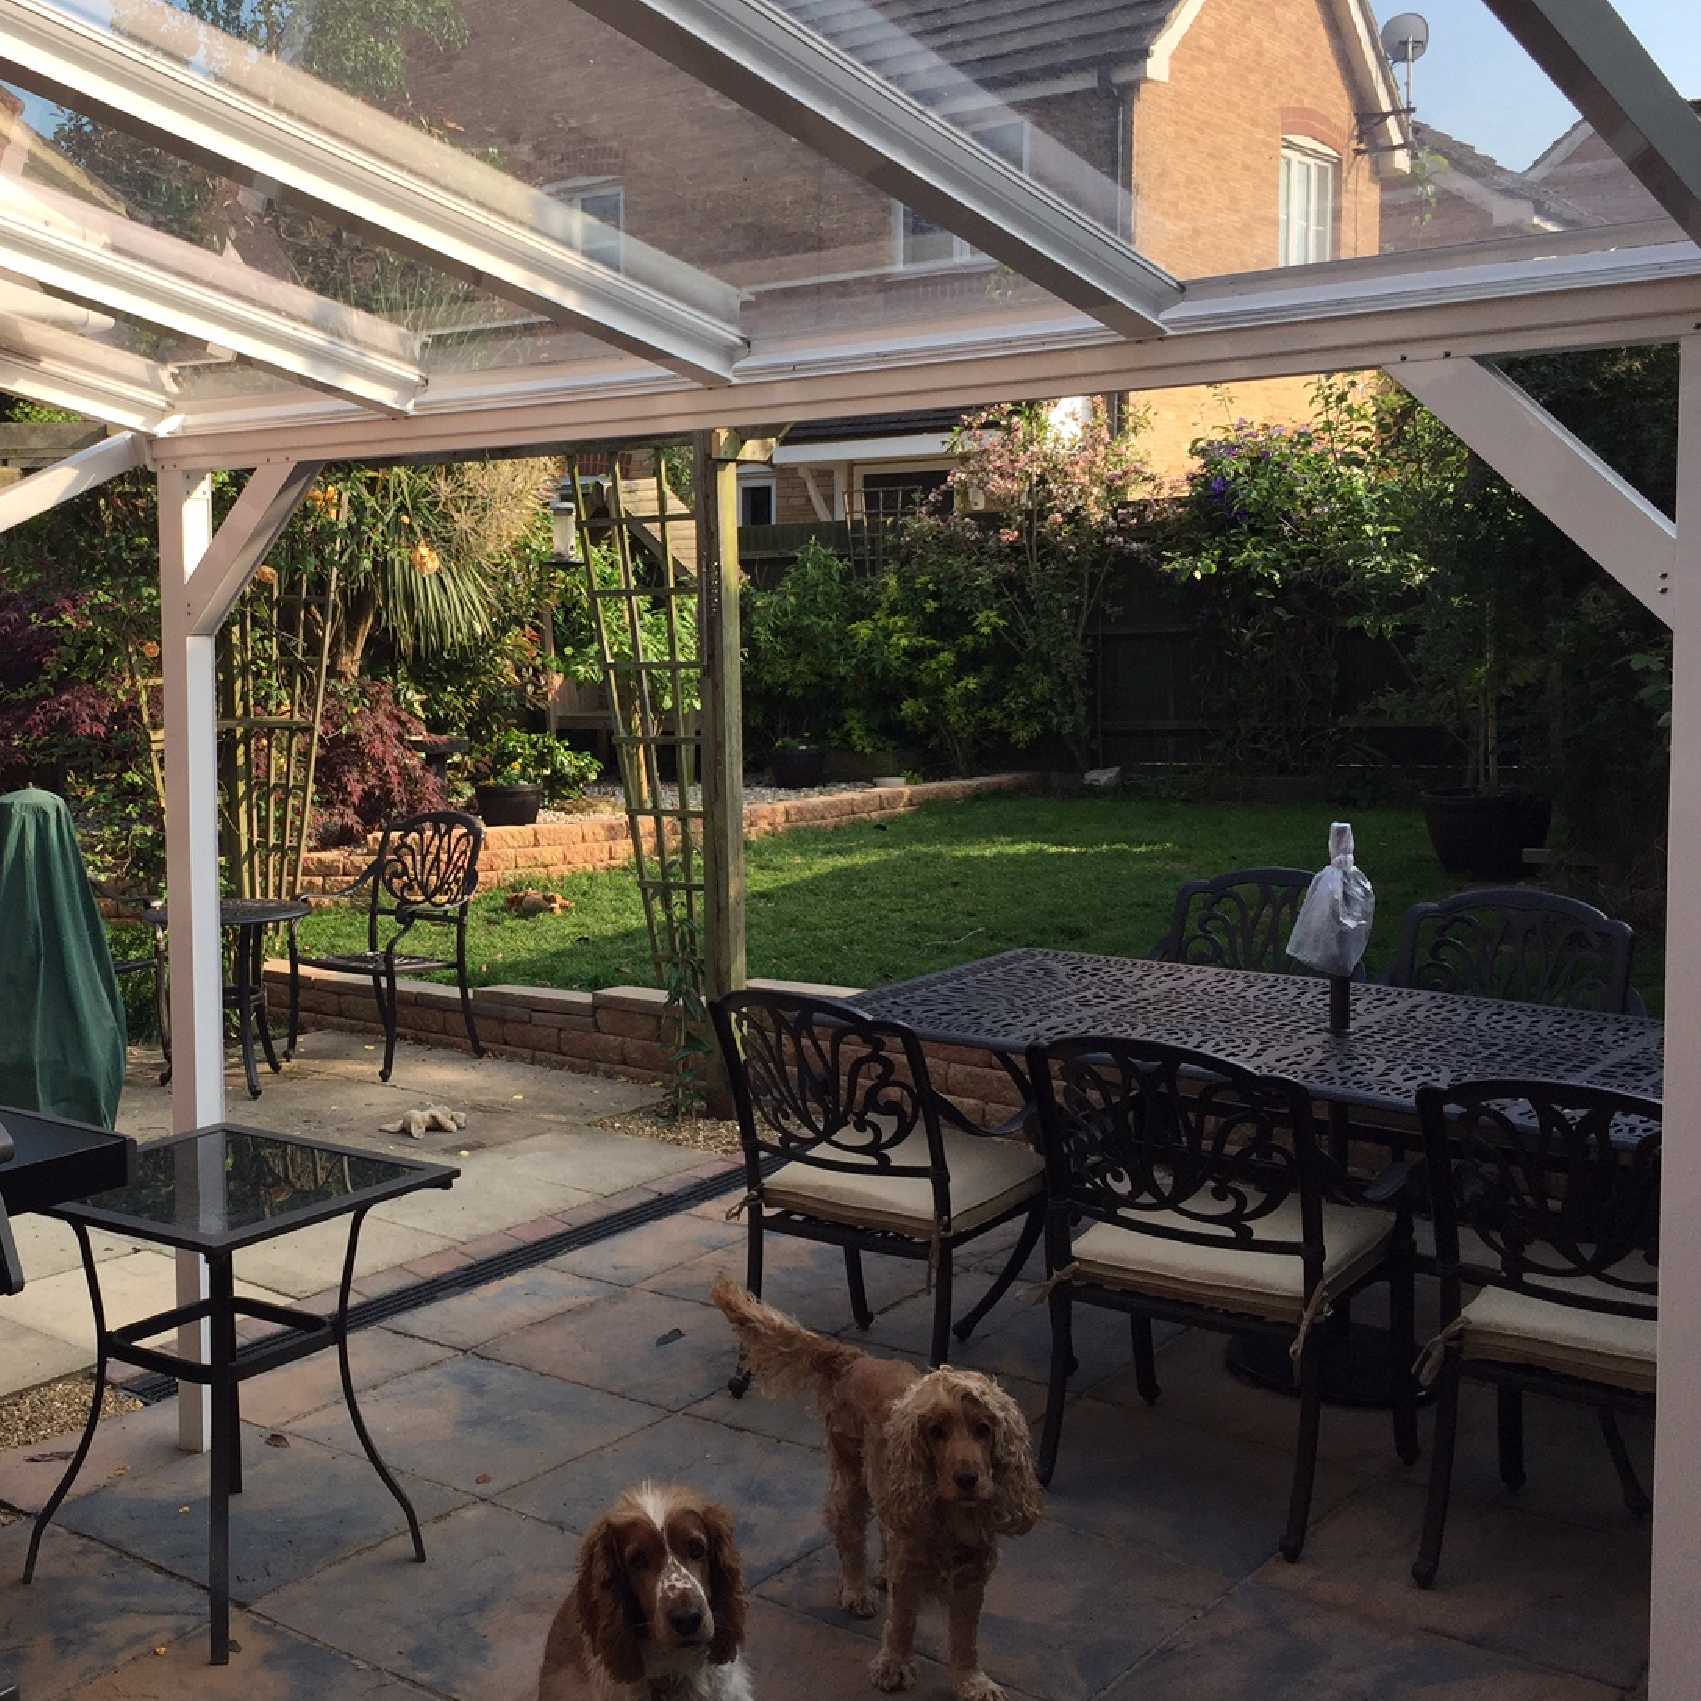 Affordable Omega Smart Lean-To Canopy, White UNGLAZED for 6mm Glazing - 4.9m (W) x 1.5m (P), (3) Supporting Posts